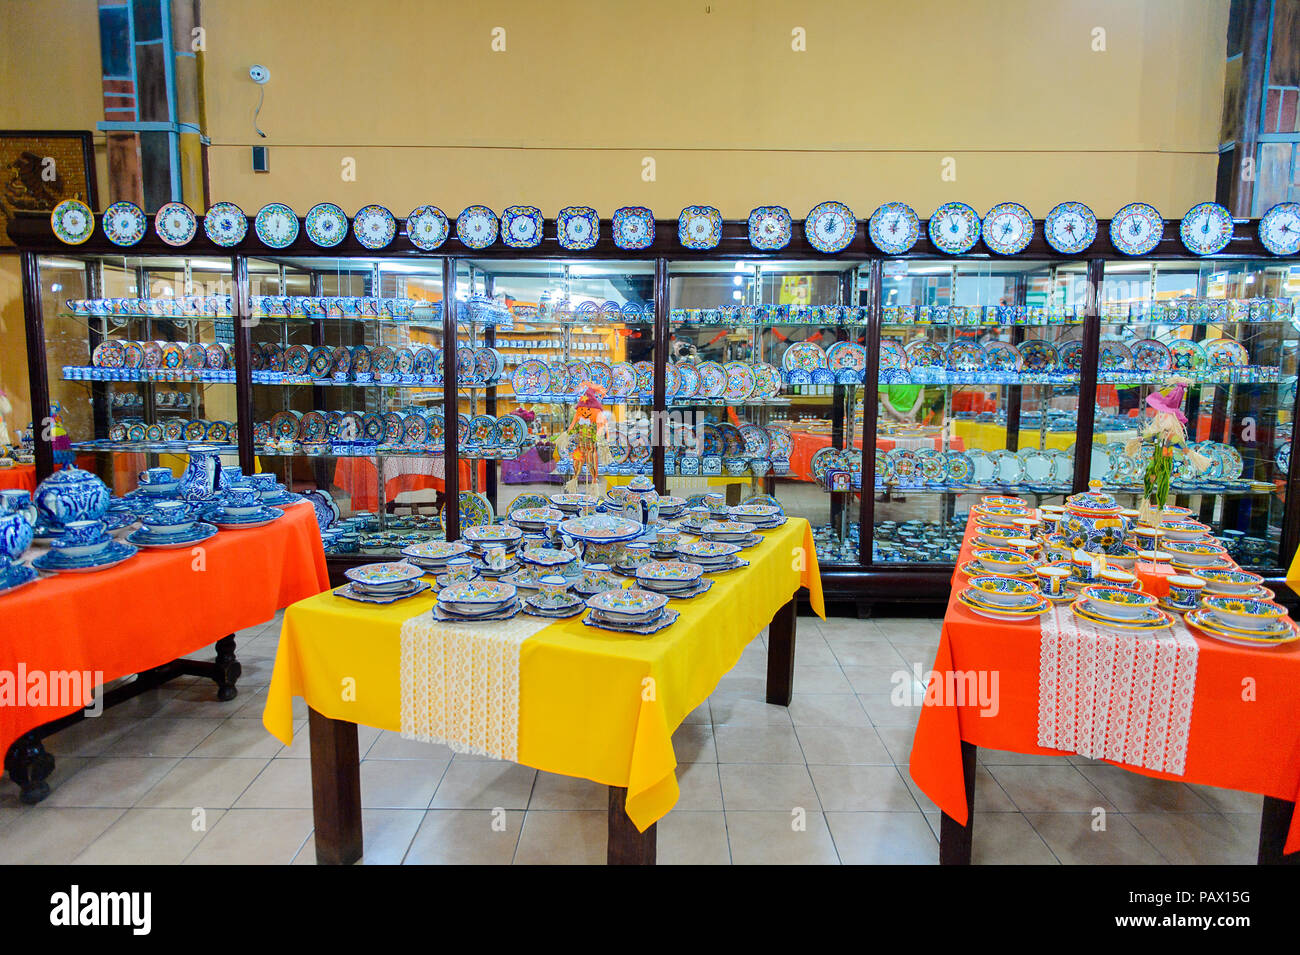 PUEBLA, MEXICO - OCT 30, 2016: Interior of the shop which sells articles made of talavera,  Mexican traditional type of maiolica pottery, distinguishe Stock Photo